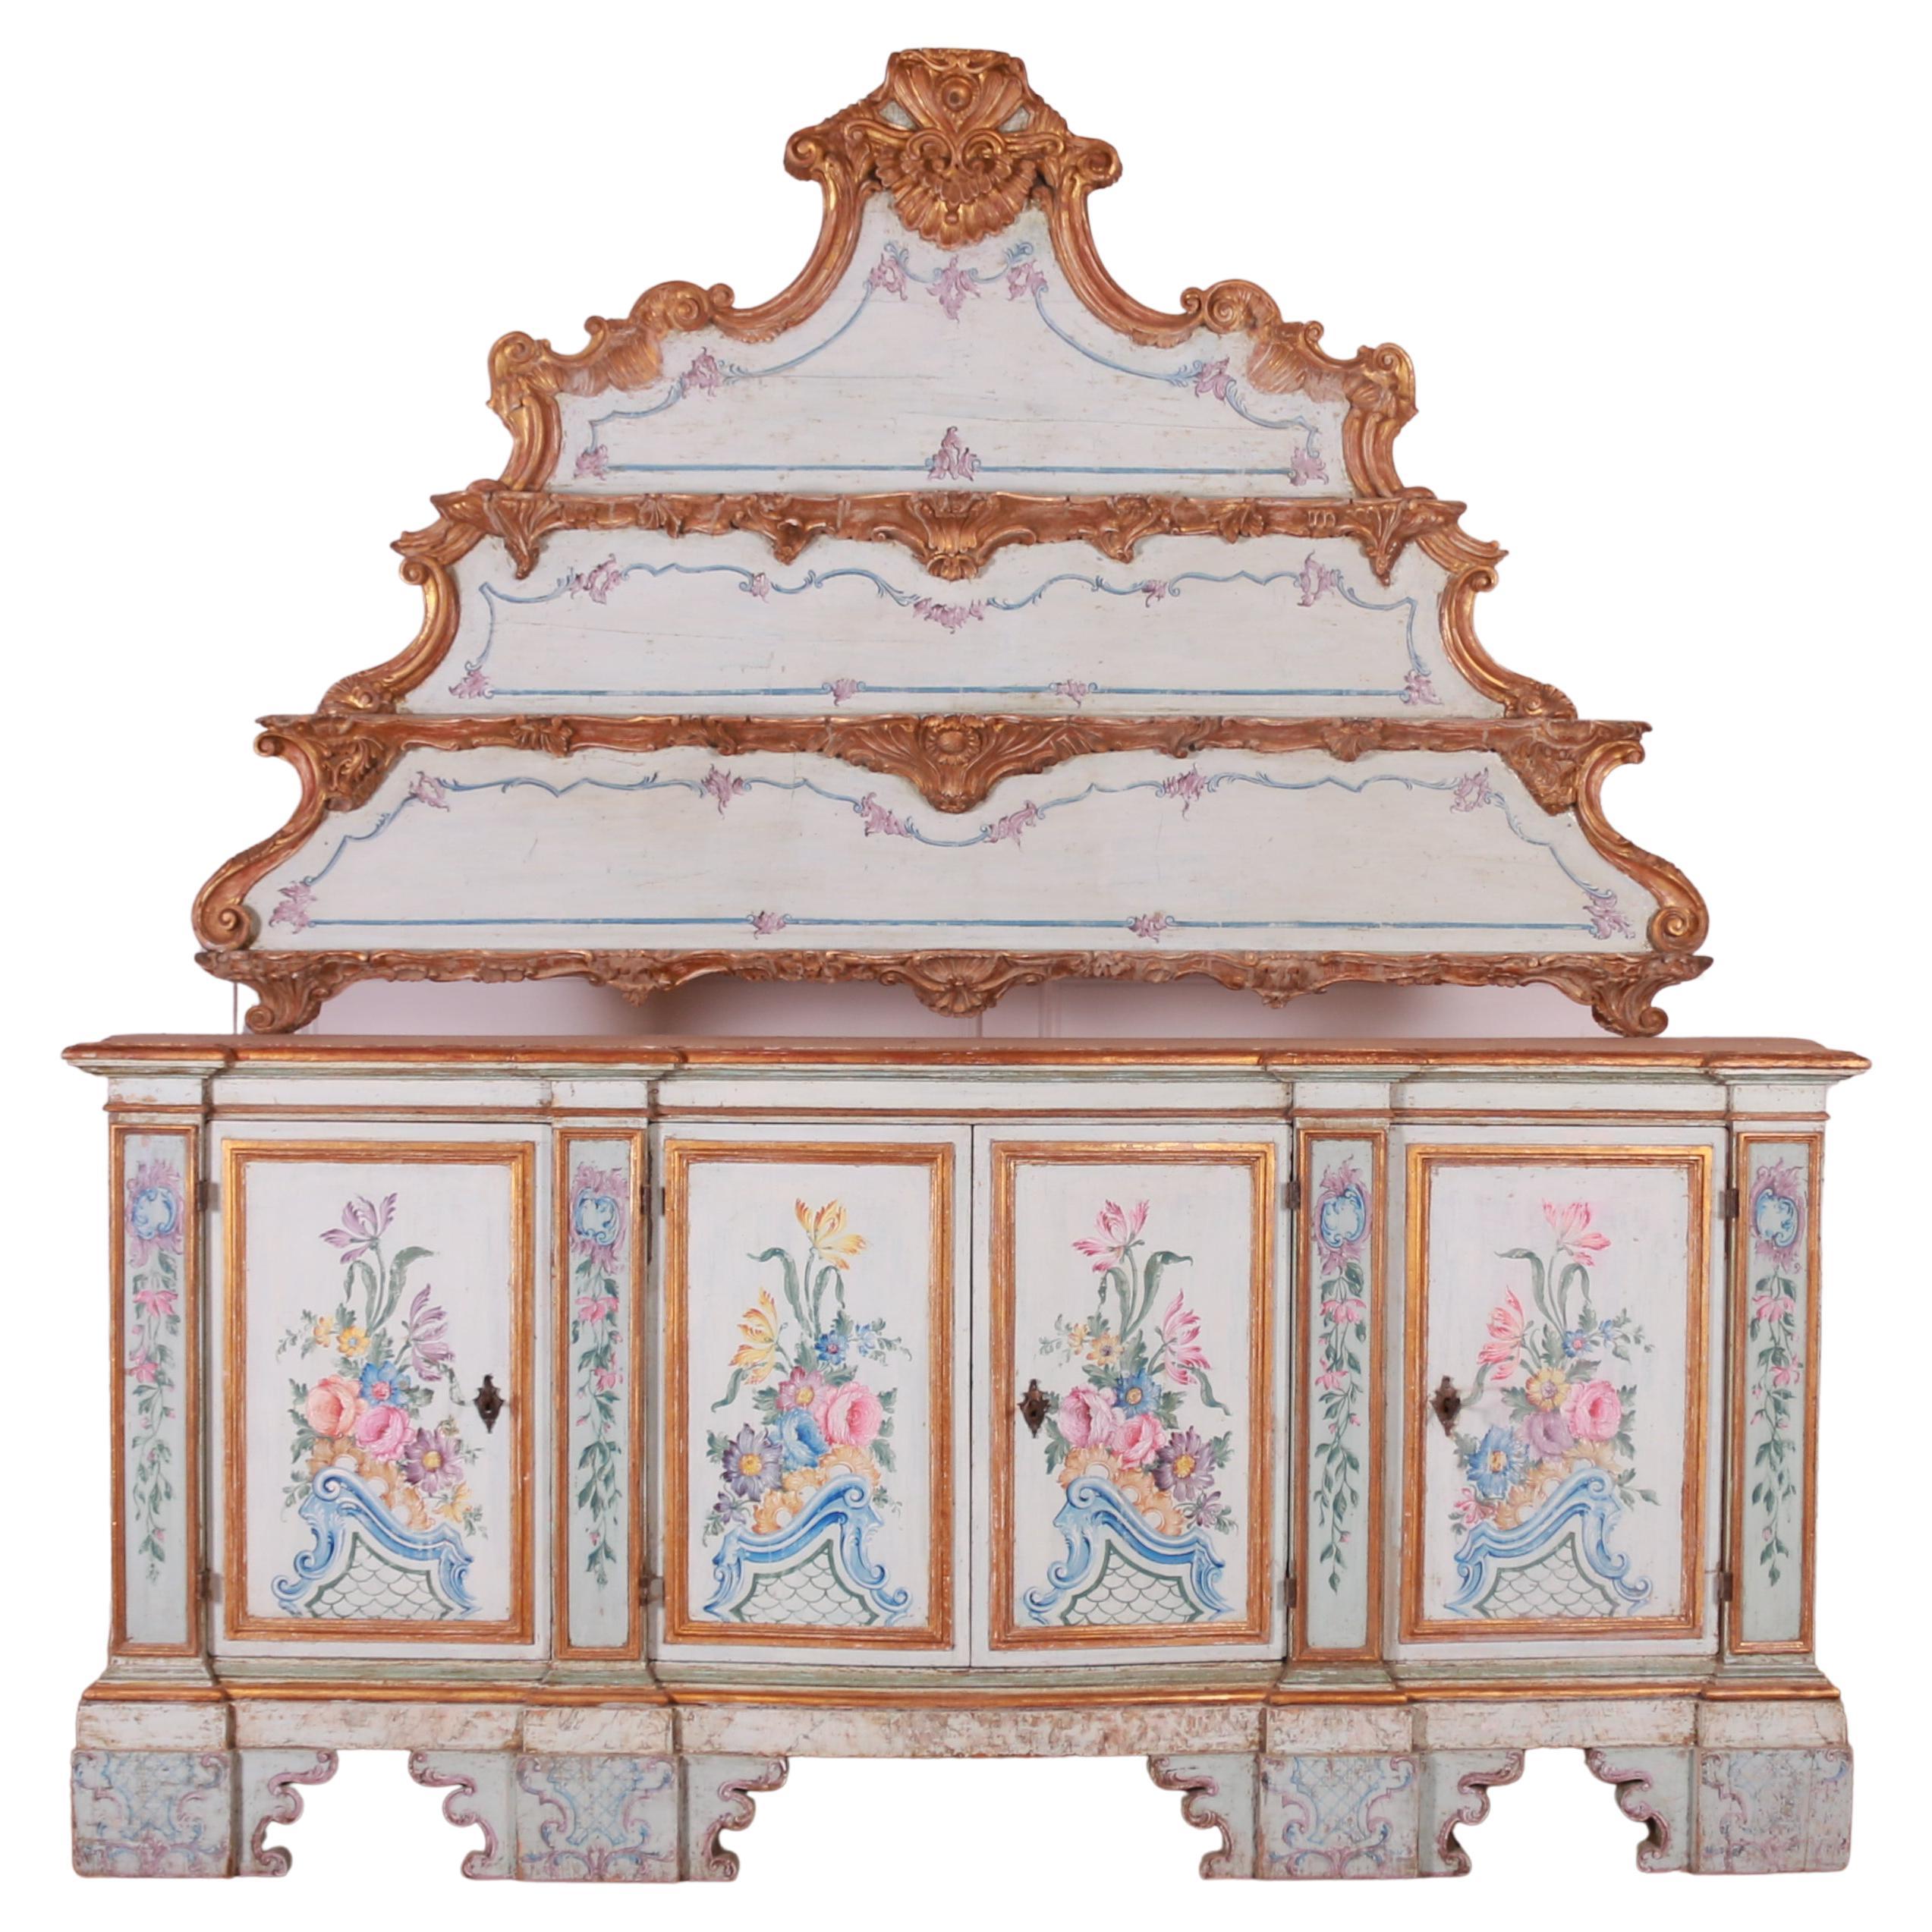 Stunning 18th Century Original Painted Italian Sideboard For Sale